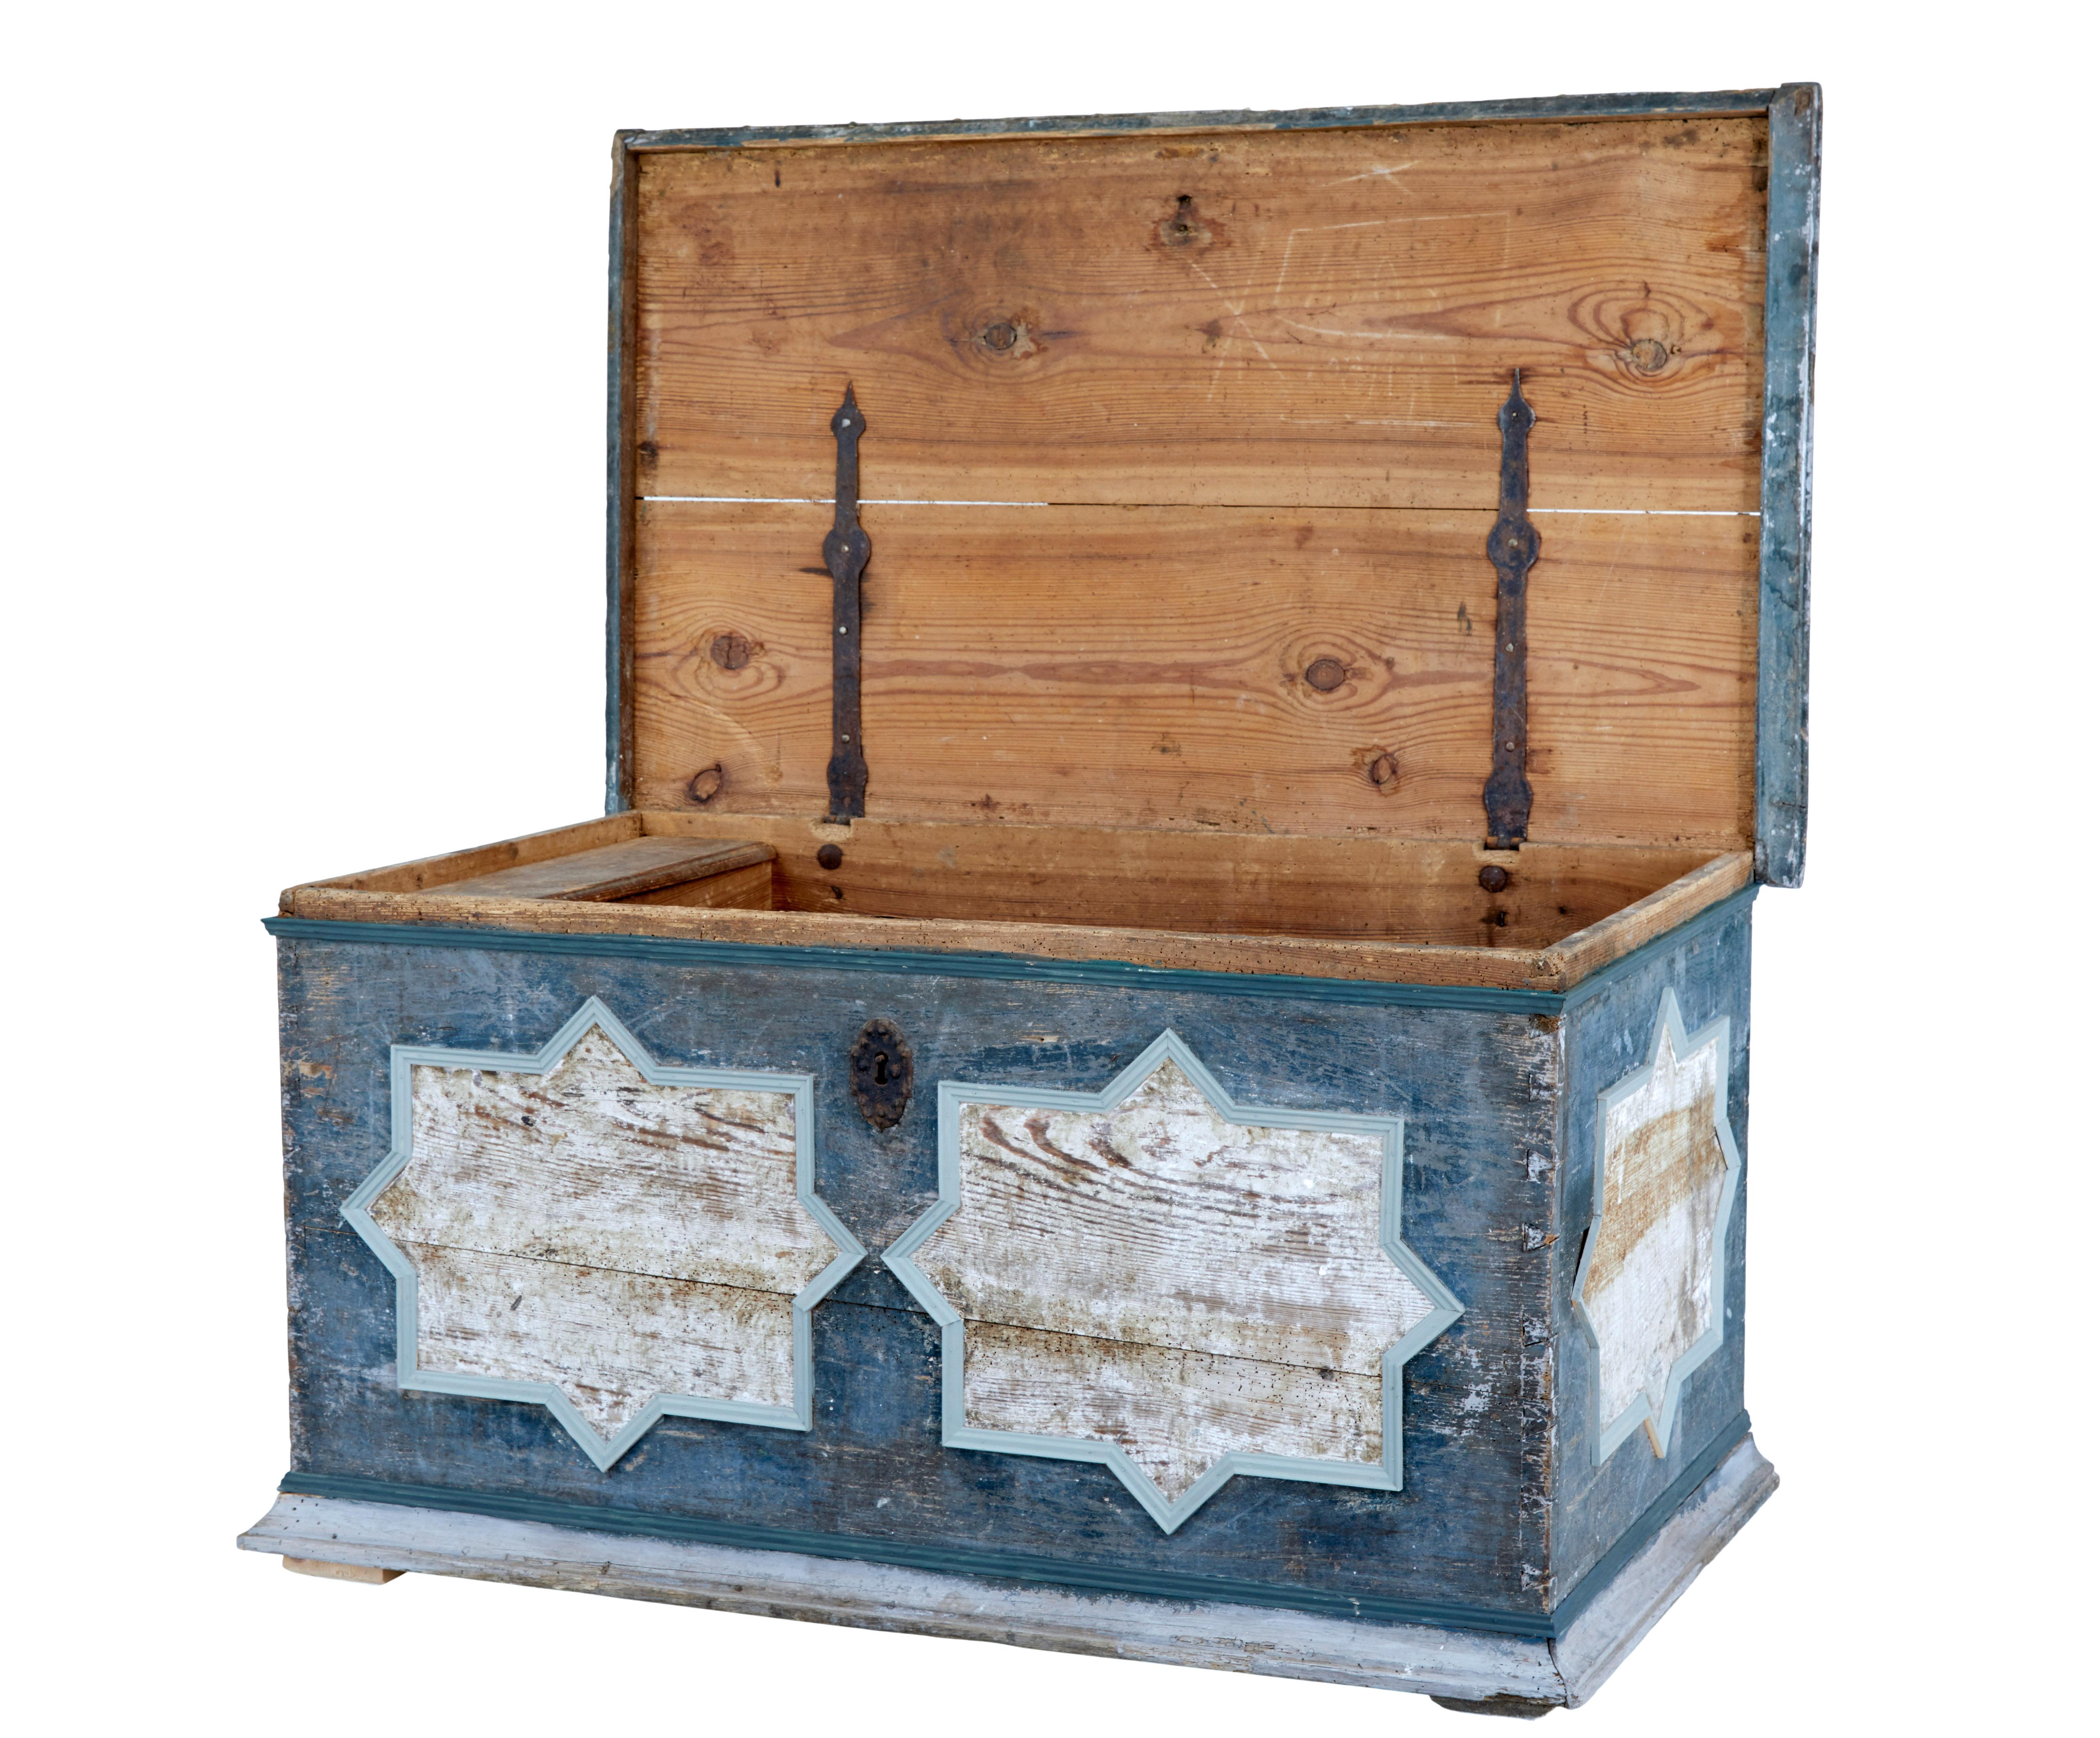 Mid 19th century painted pine blanket chest circa 1840.

Good quality mid 19th century painted pine box which is likely to be from scandinavia.  Flat 2 plank top with moulded edge, original paint to top, front back and sides, with replaced moulded